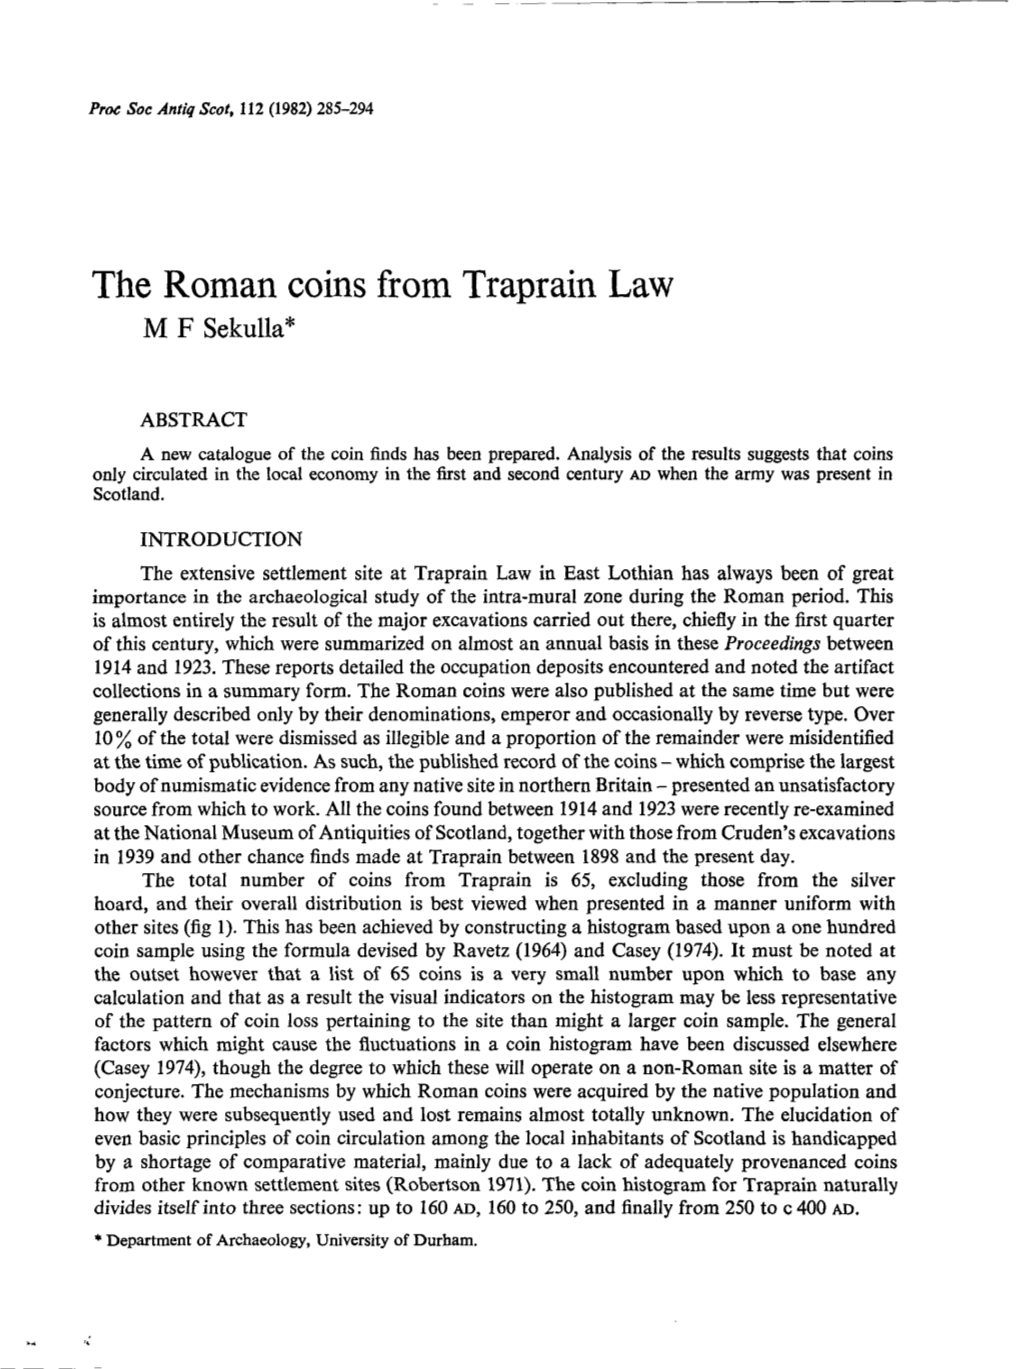 The Roman Coins from Traprain